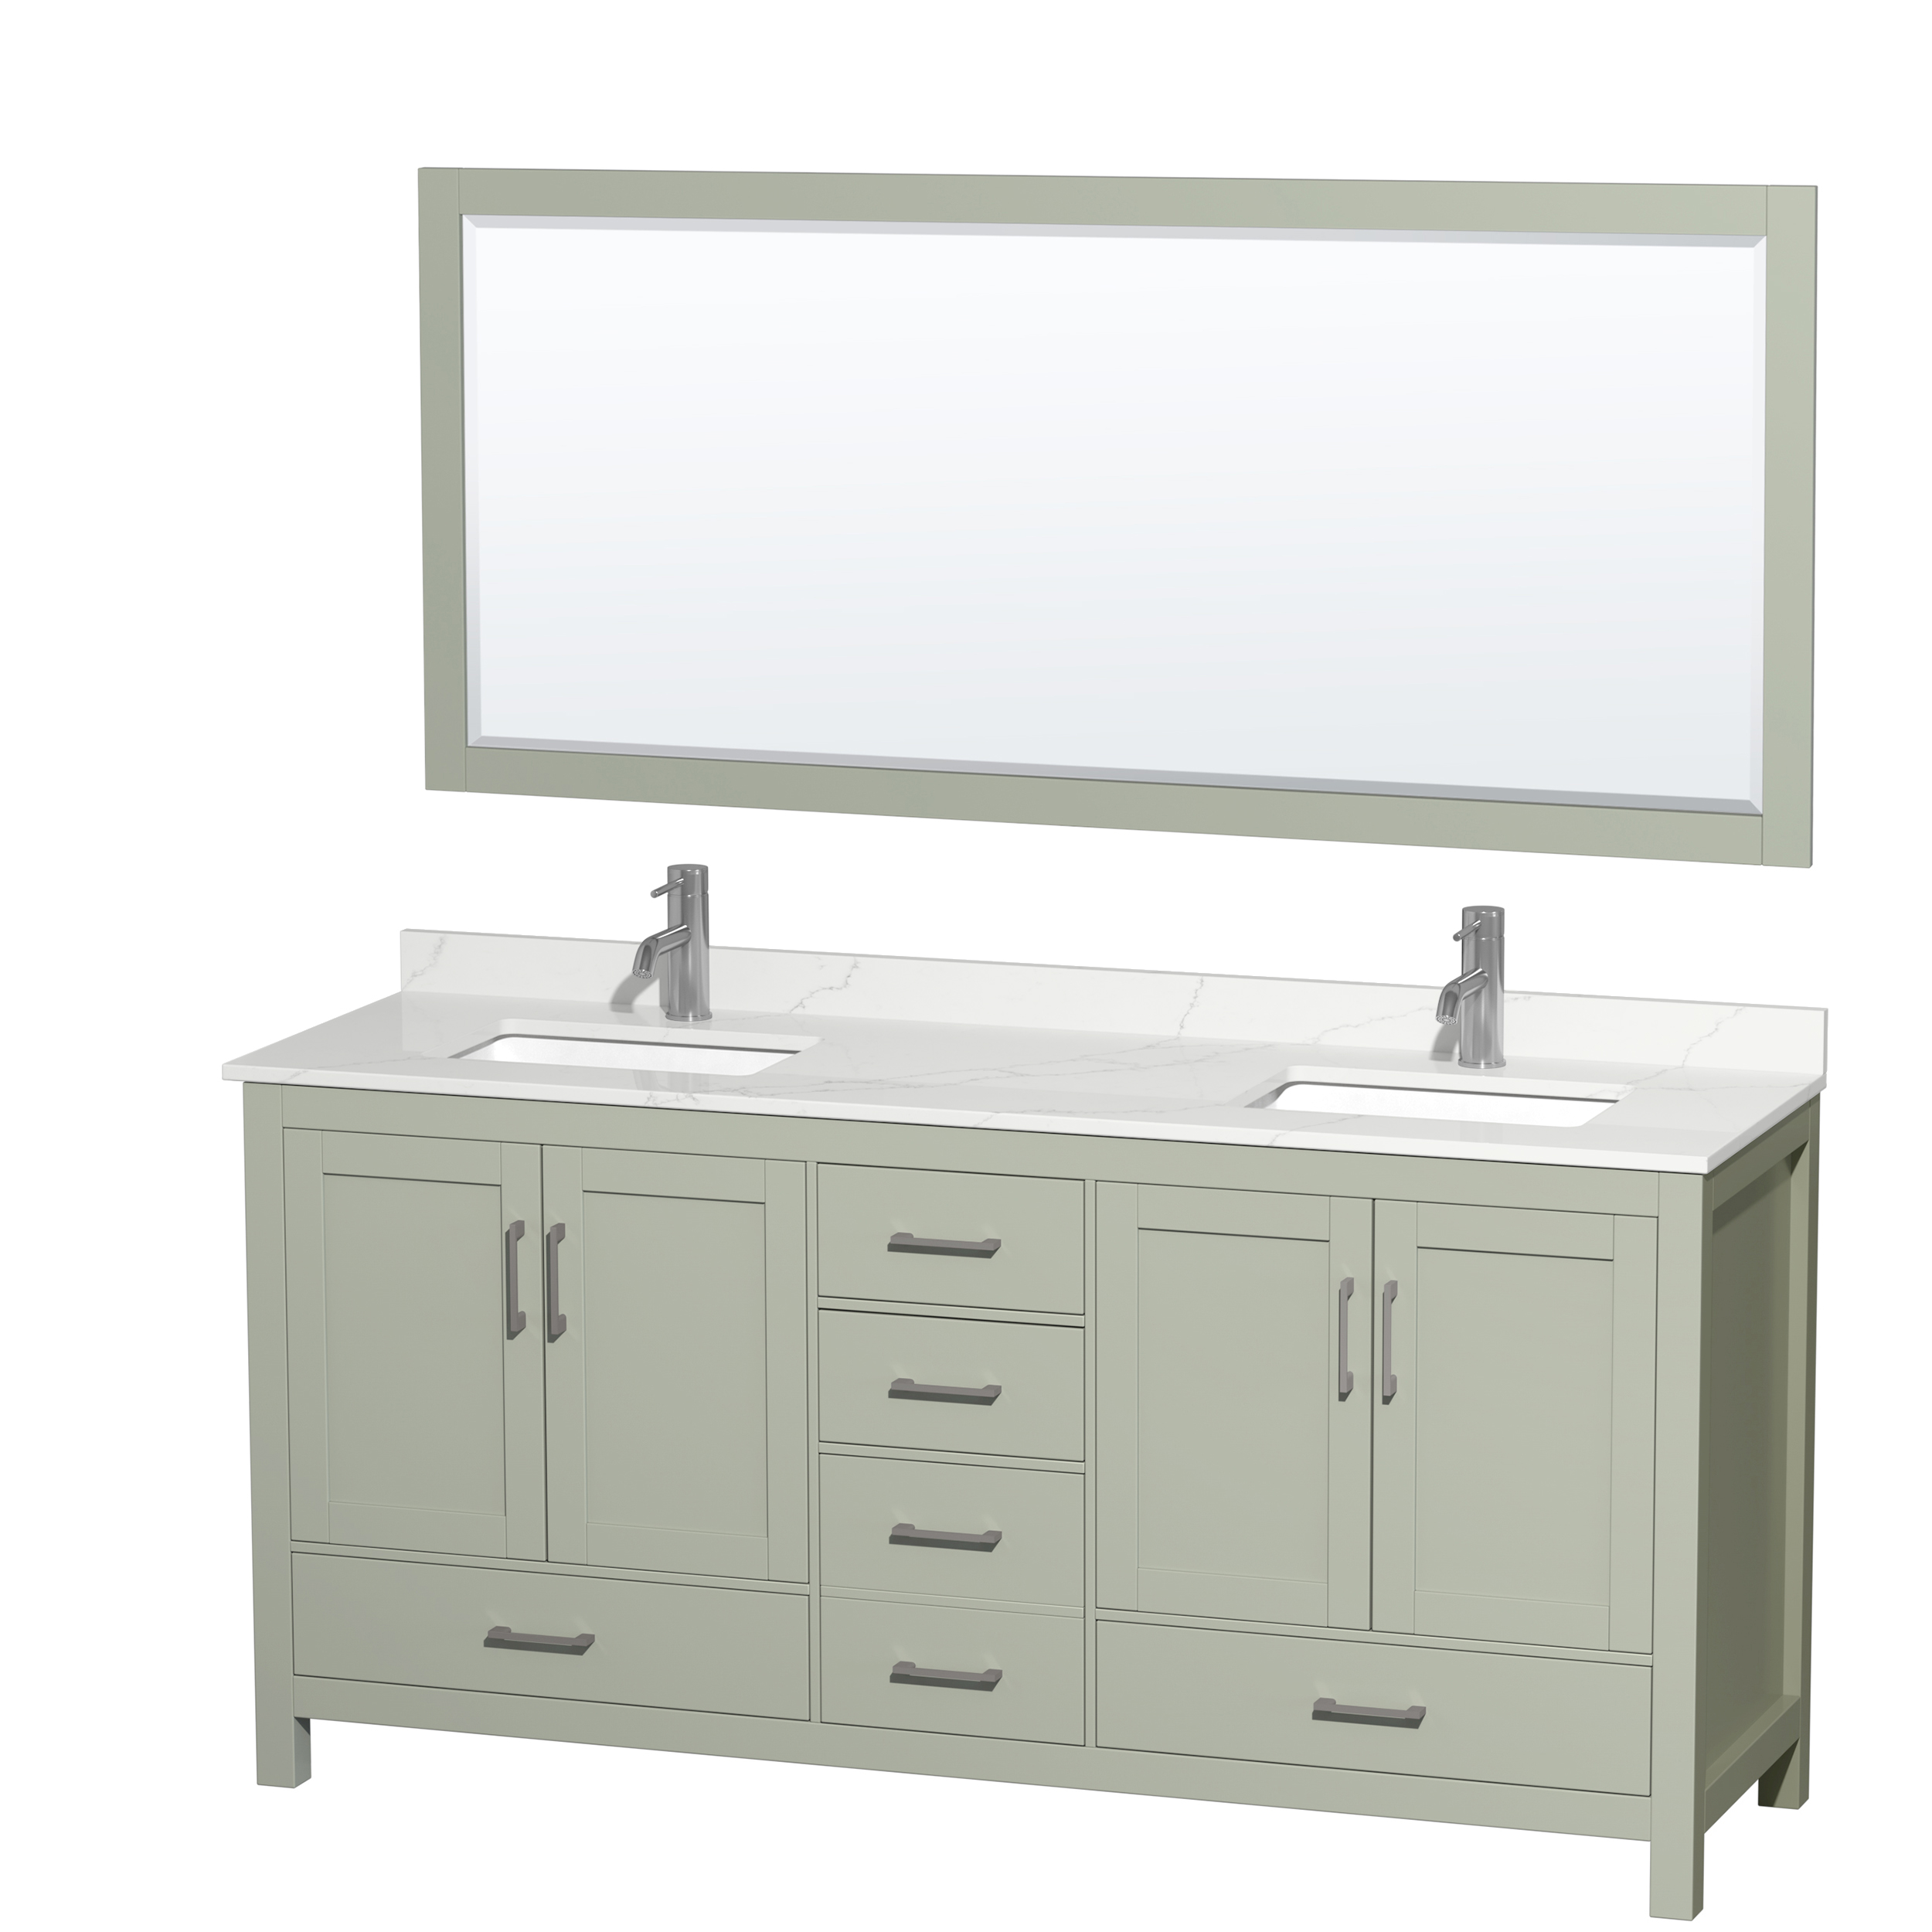 Sheffield 72" Double Bathroom Vanity by Wyndham Collection - White WC-1414-72-DBL-VAN-WHT